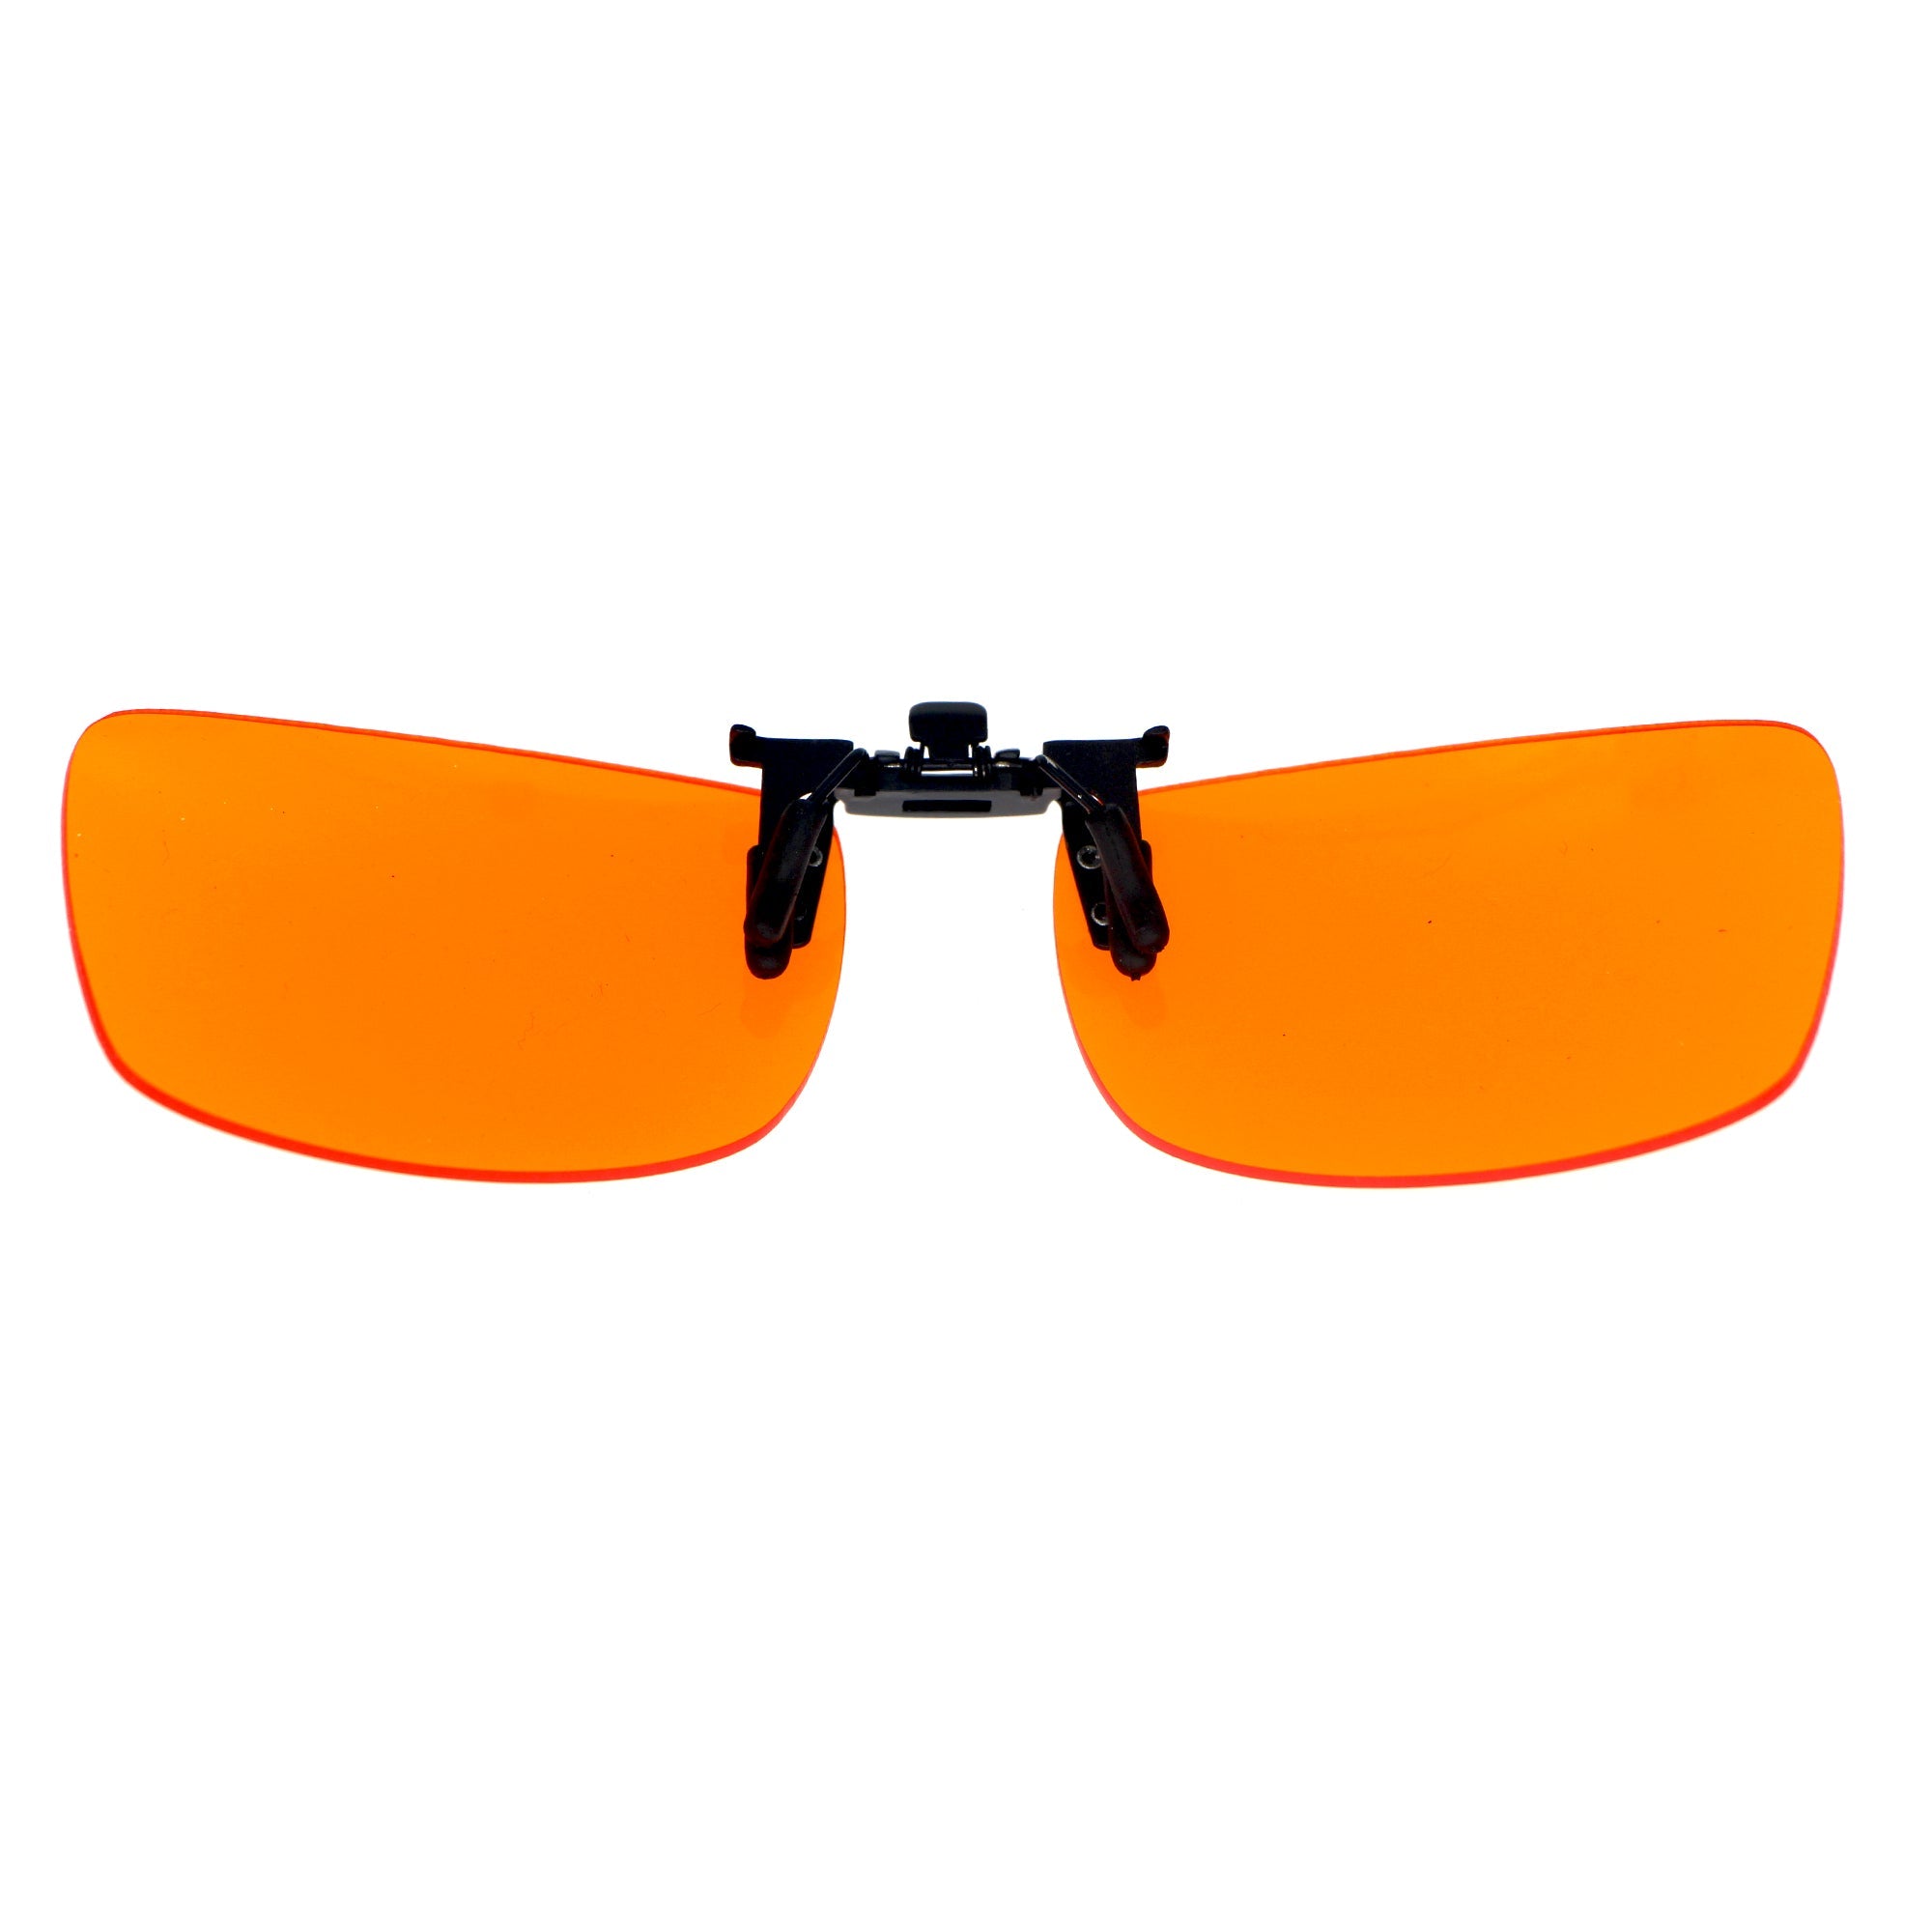 Dilicn FREE GIFT 2 pcs Set Sunglasses Clip ons Anti blue light Clip ons